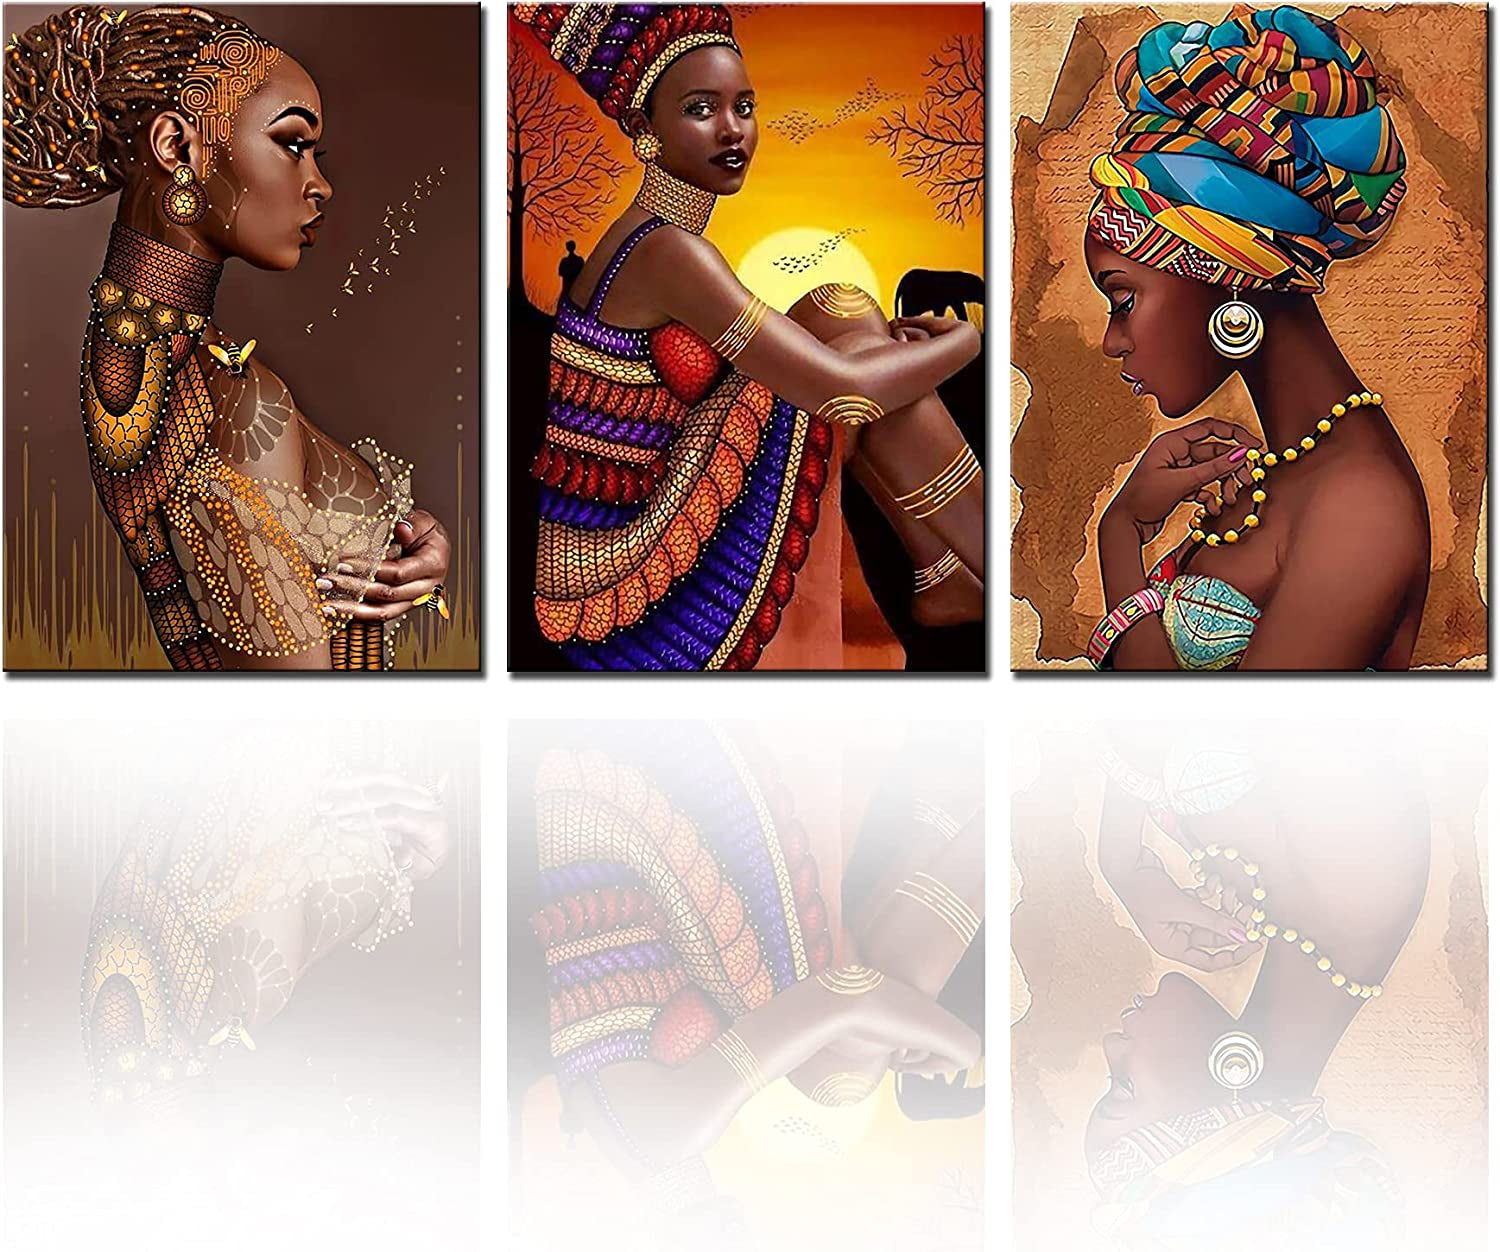 African Women Portrait Canvas Wall Art for Living Room Decor 3 Pieces Colorful Weird African Girl Oil Paintings Brown Kitchen Wall Decor Artwork Home Decor Room Wall Pictures Framed 42X20 Inch